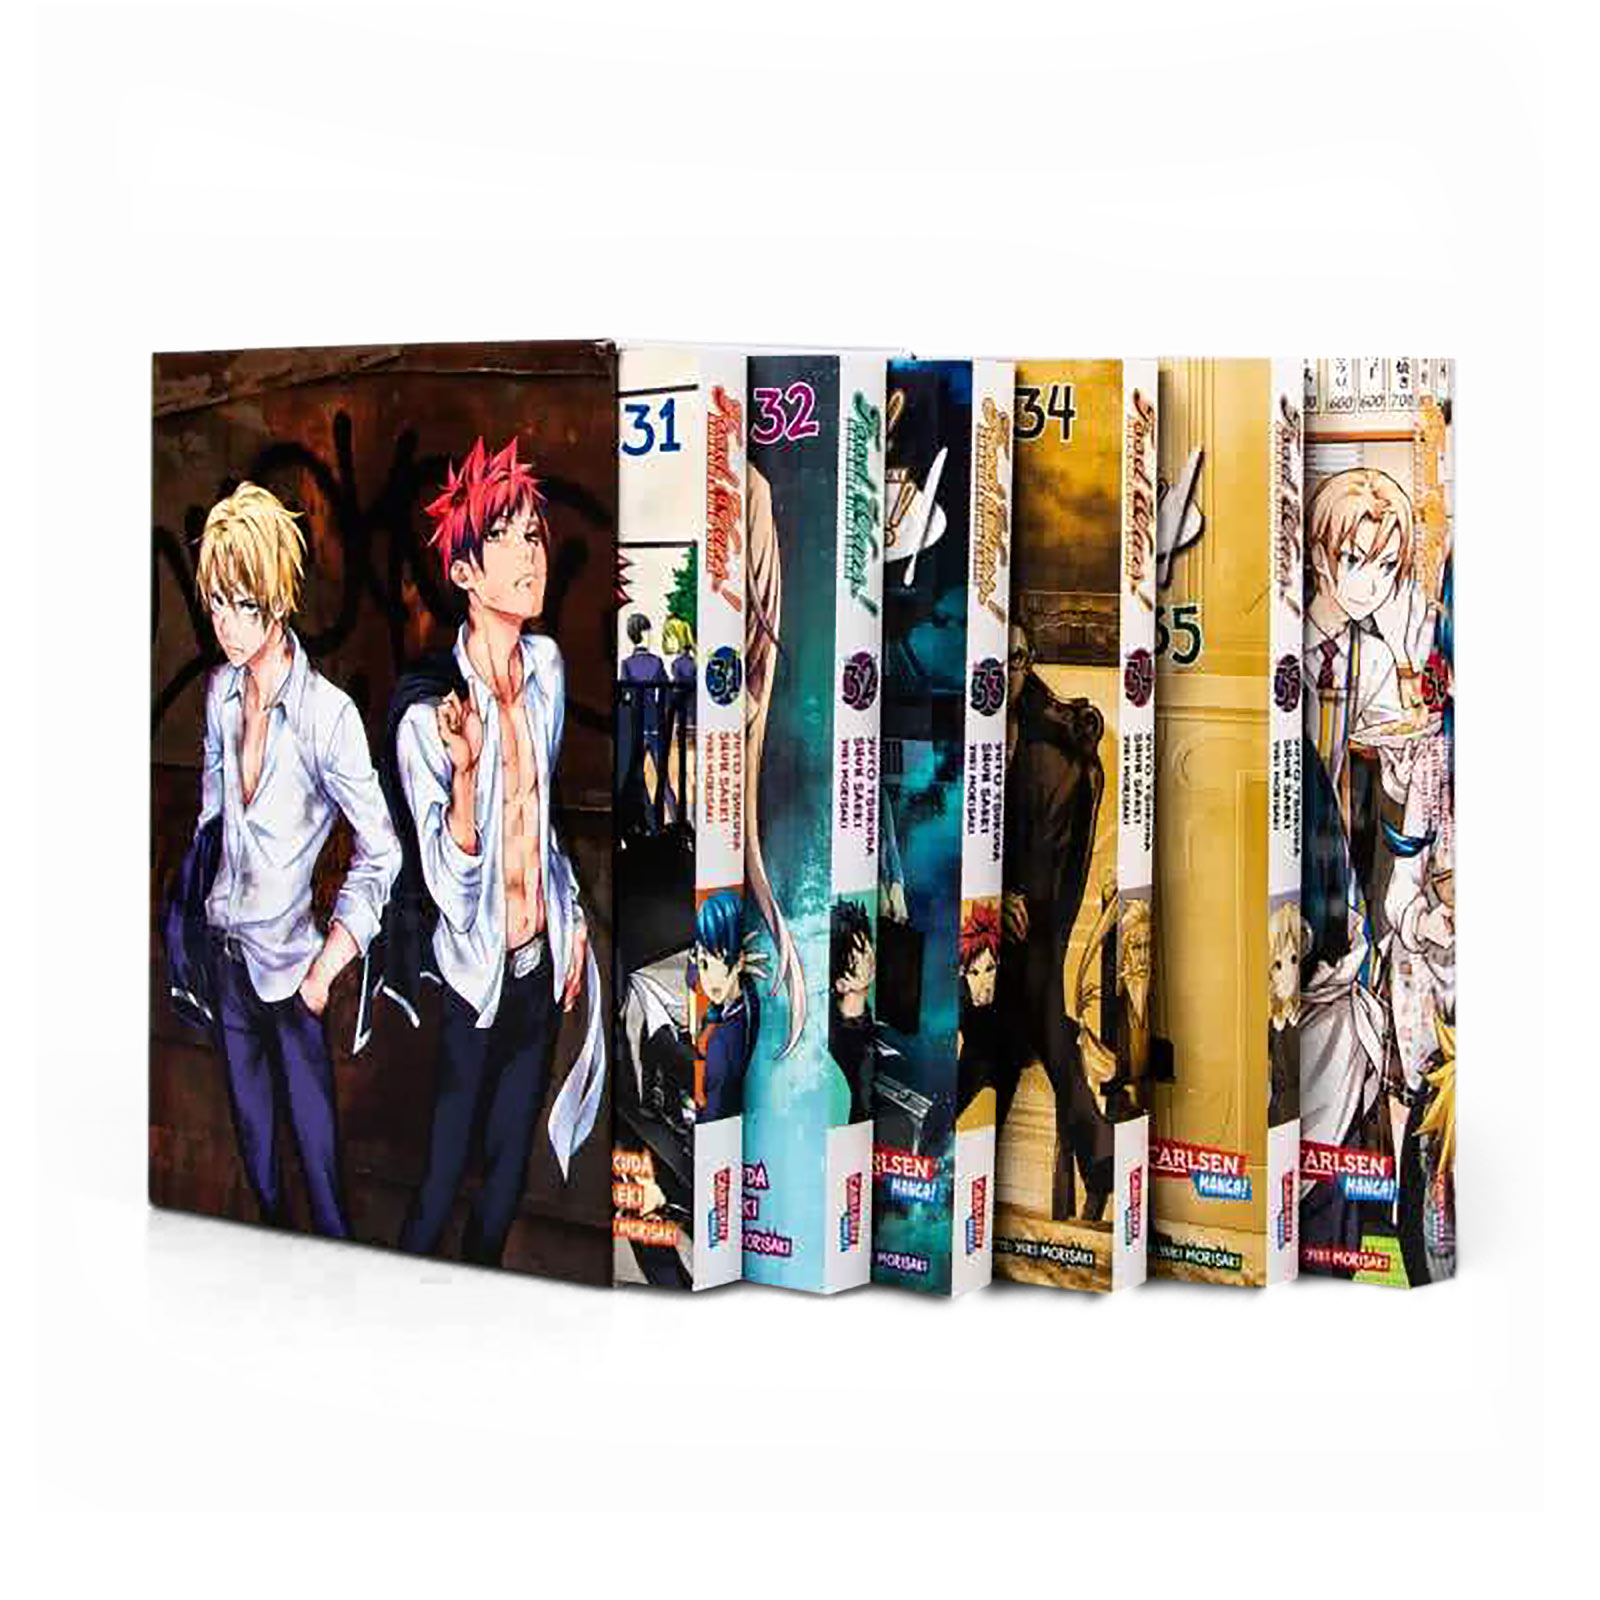 Food Wars - Shokugeki No Soma Volume 31-36 in Collector's Box with Extra